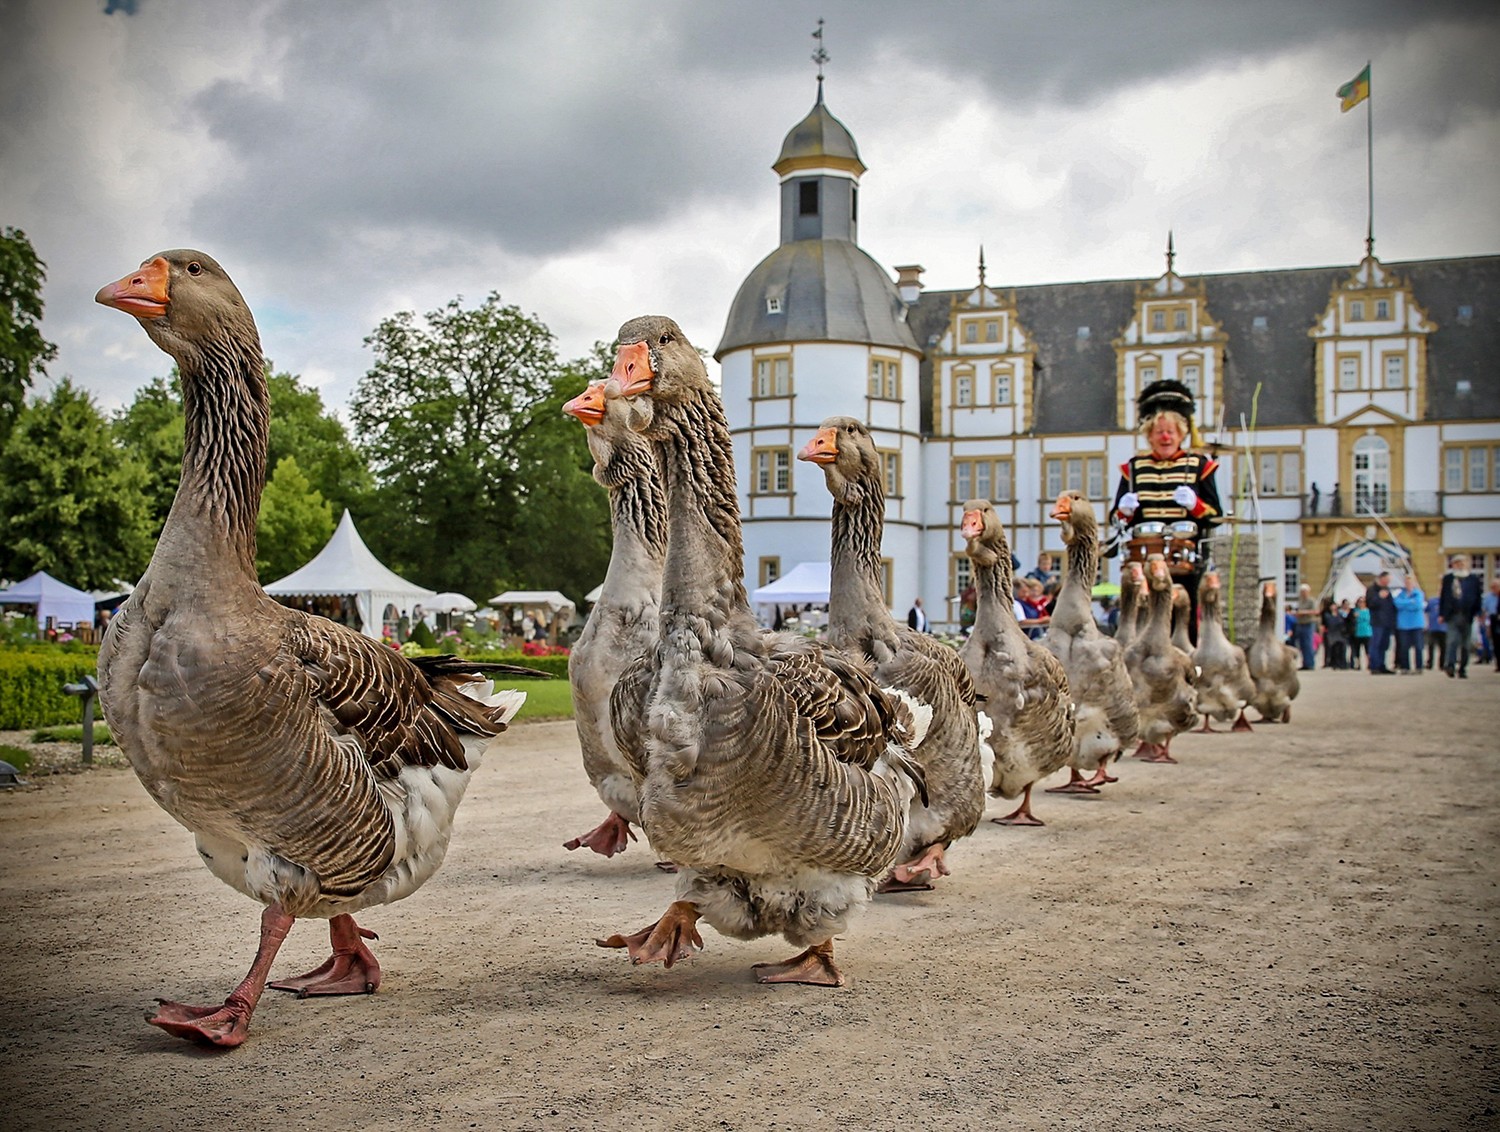 This is the Ganzenfanfare - a goose band from the netherlands.